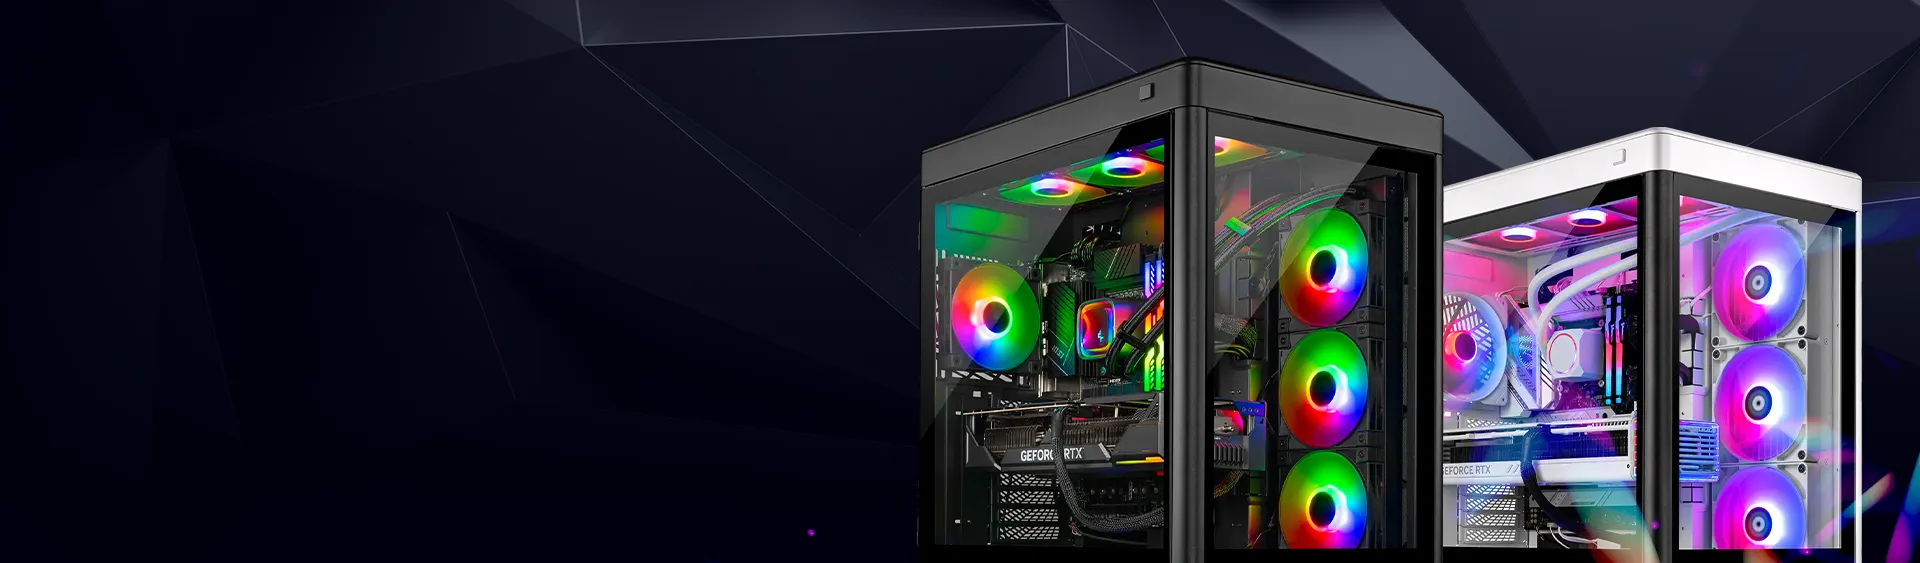 X2 Epic Prism III PC Giveaway!